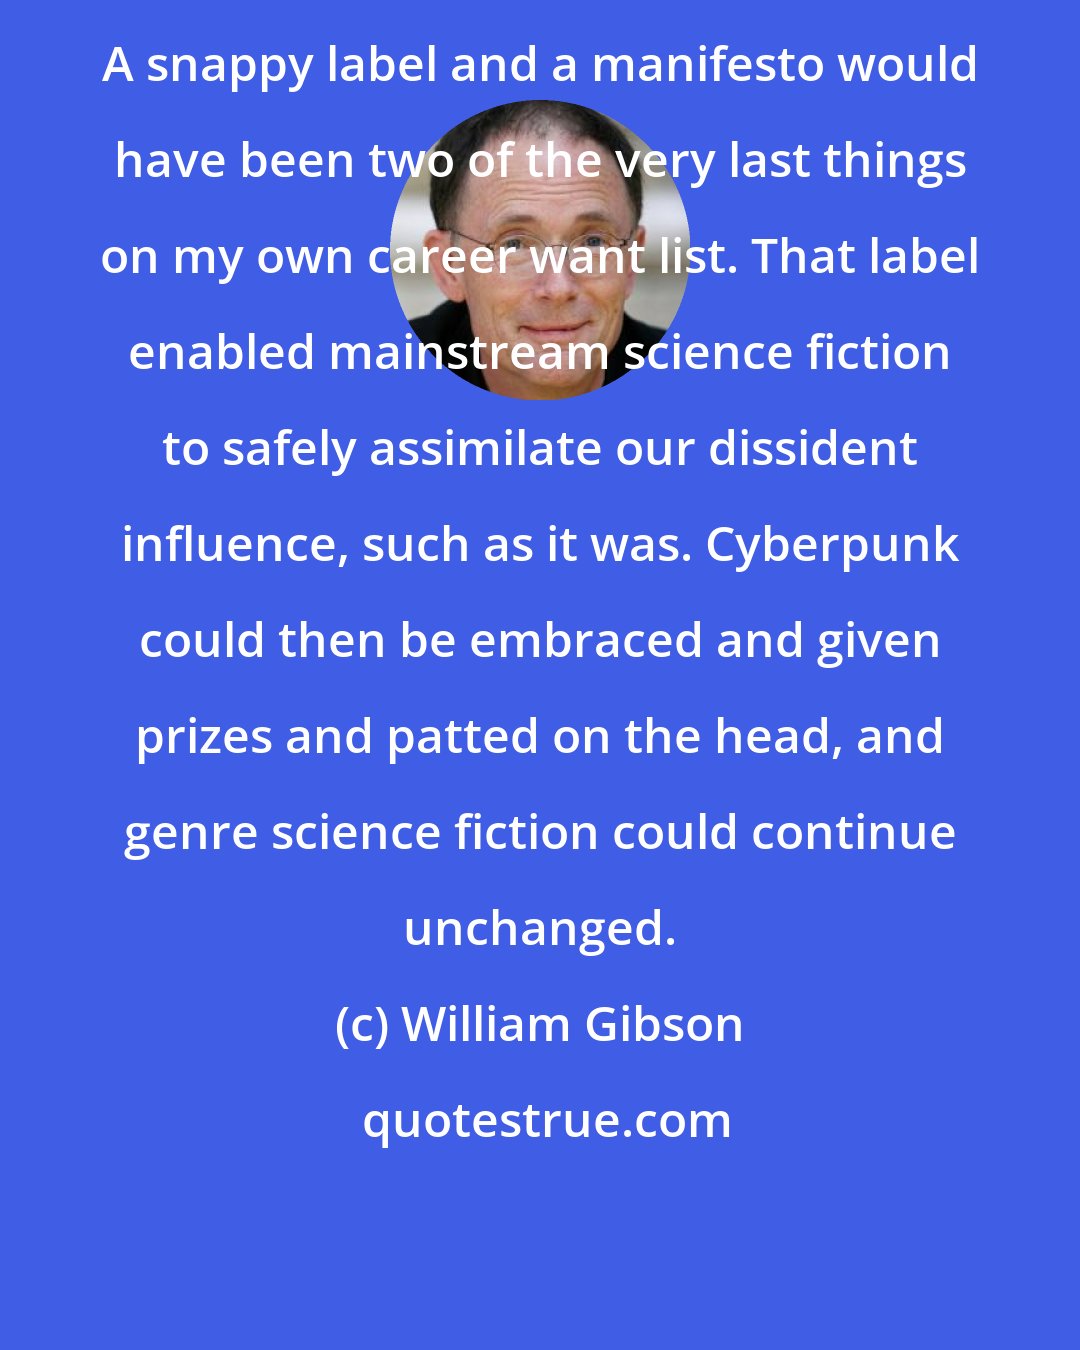 William Gibson: A snappy label and a manifesto would have been two of the very last things on my own career want list. That label enabled mainstream science fiction to safely assimilate our dissident influence, such as it was. Cyberpunk could then be embraced and given prizes and patted on the head, and genre science fiction could continue unchanged.